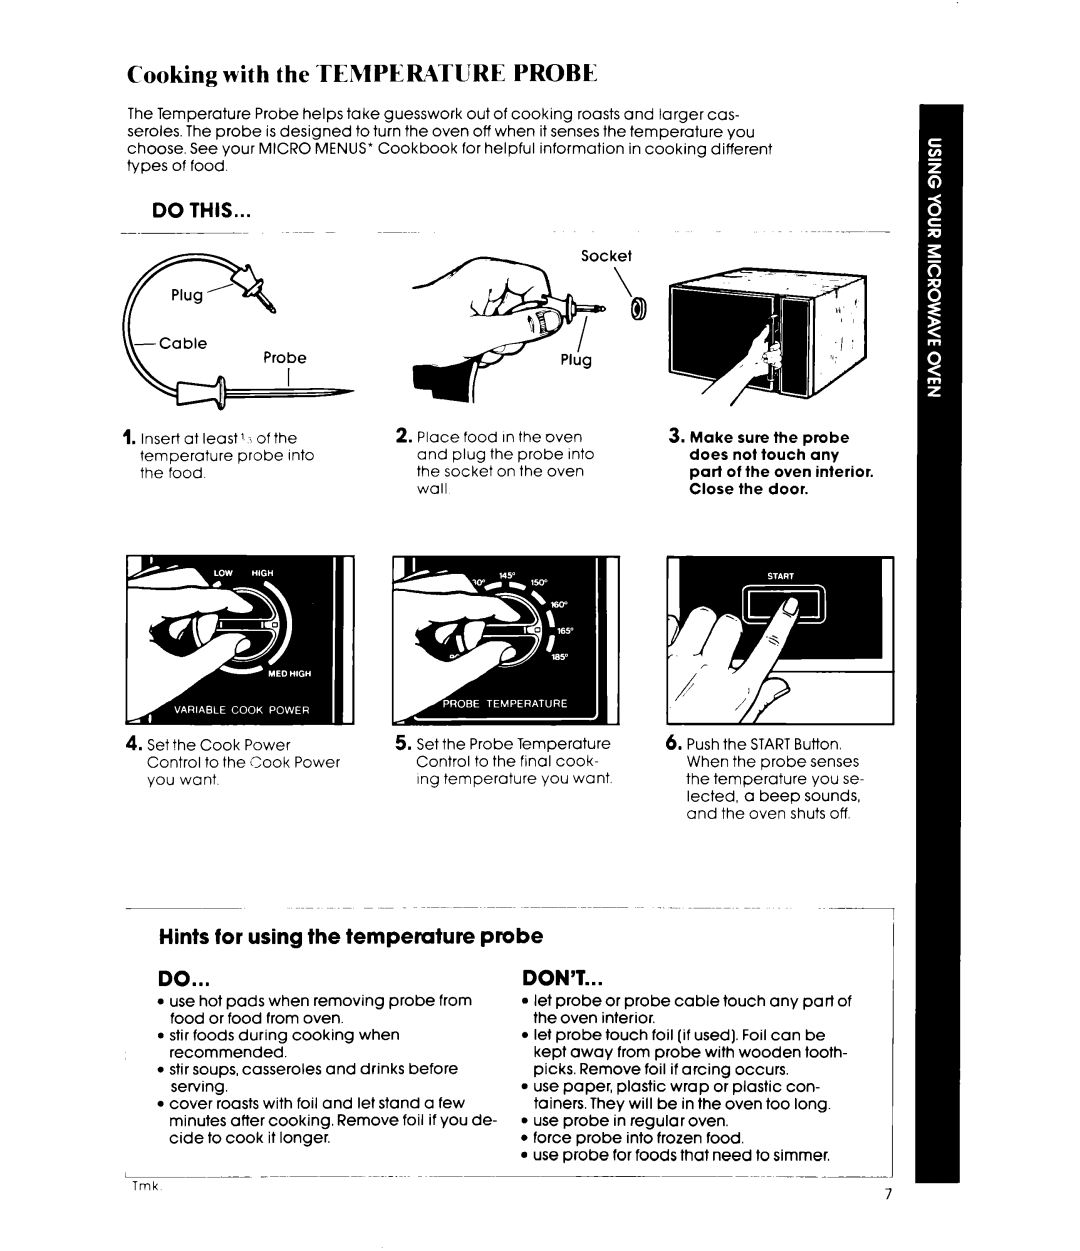 Whirlpool MW8450XP manual Cooking with the ‘rEMPER4TURE PROBE, Do This, Hints for using the temperature probe, Don’T 